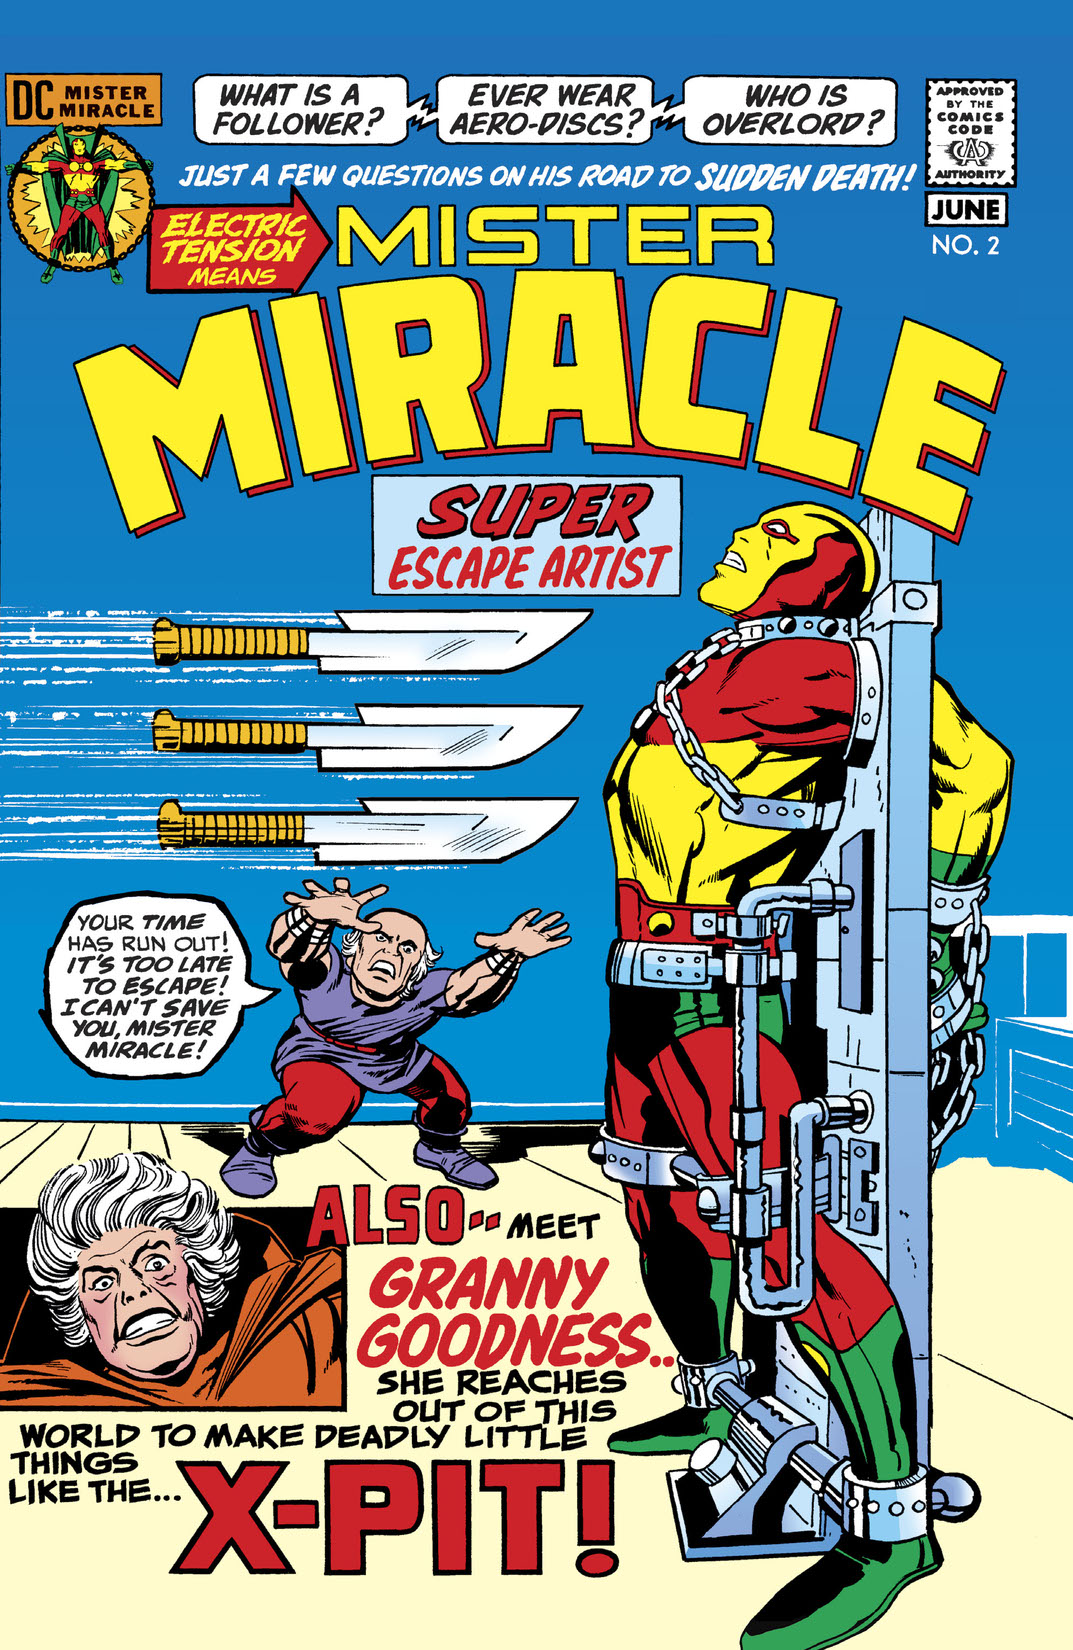 Mister Miracle (1971-) #2 preview images